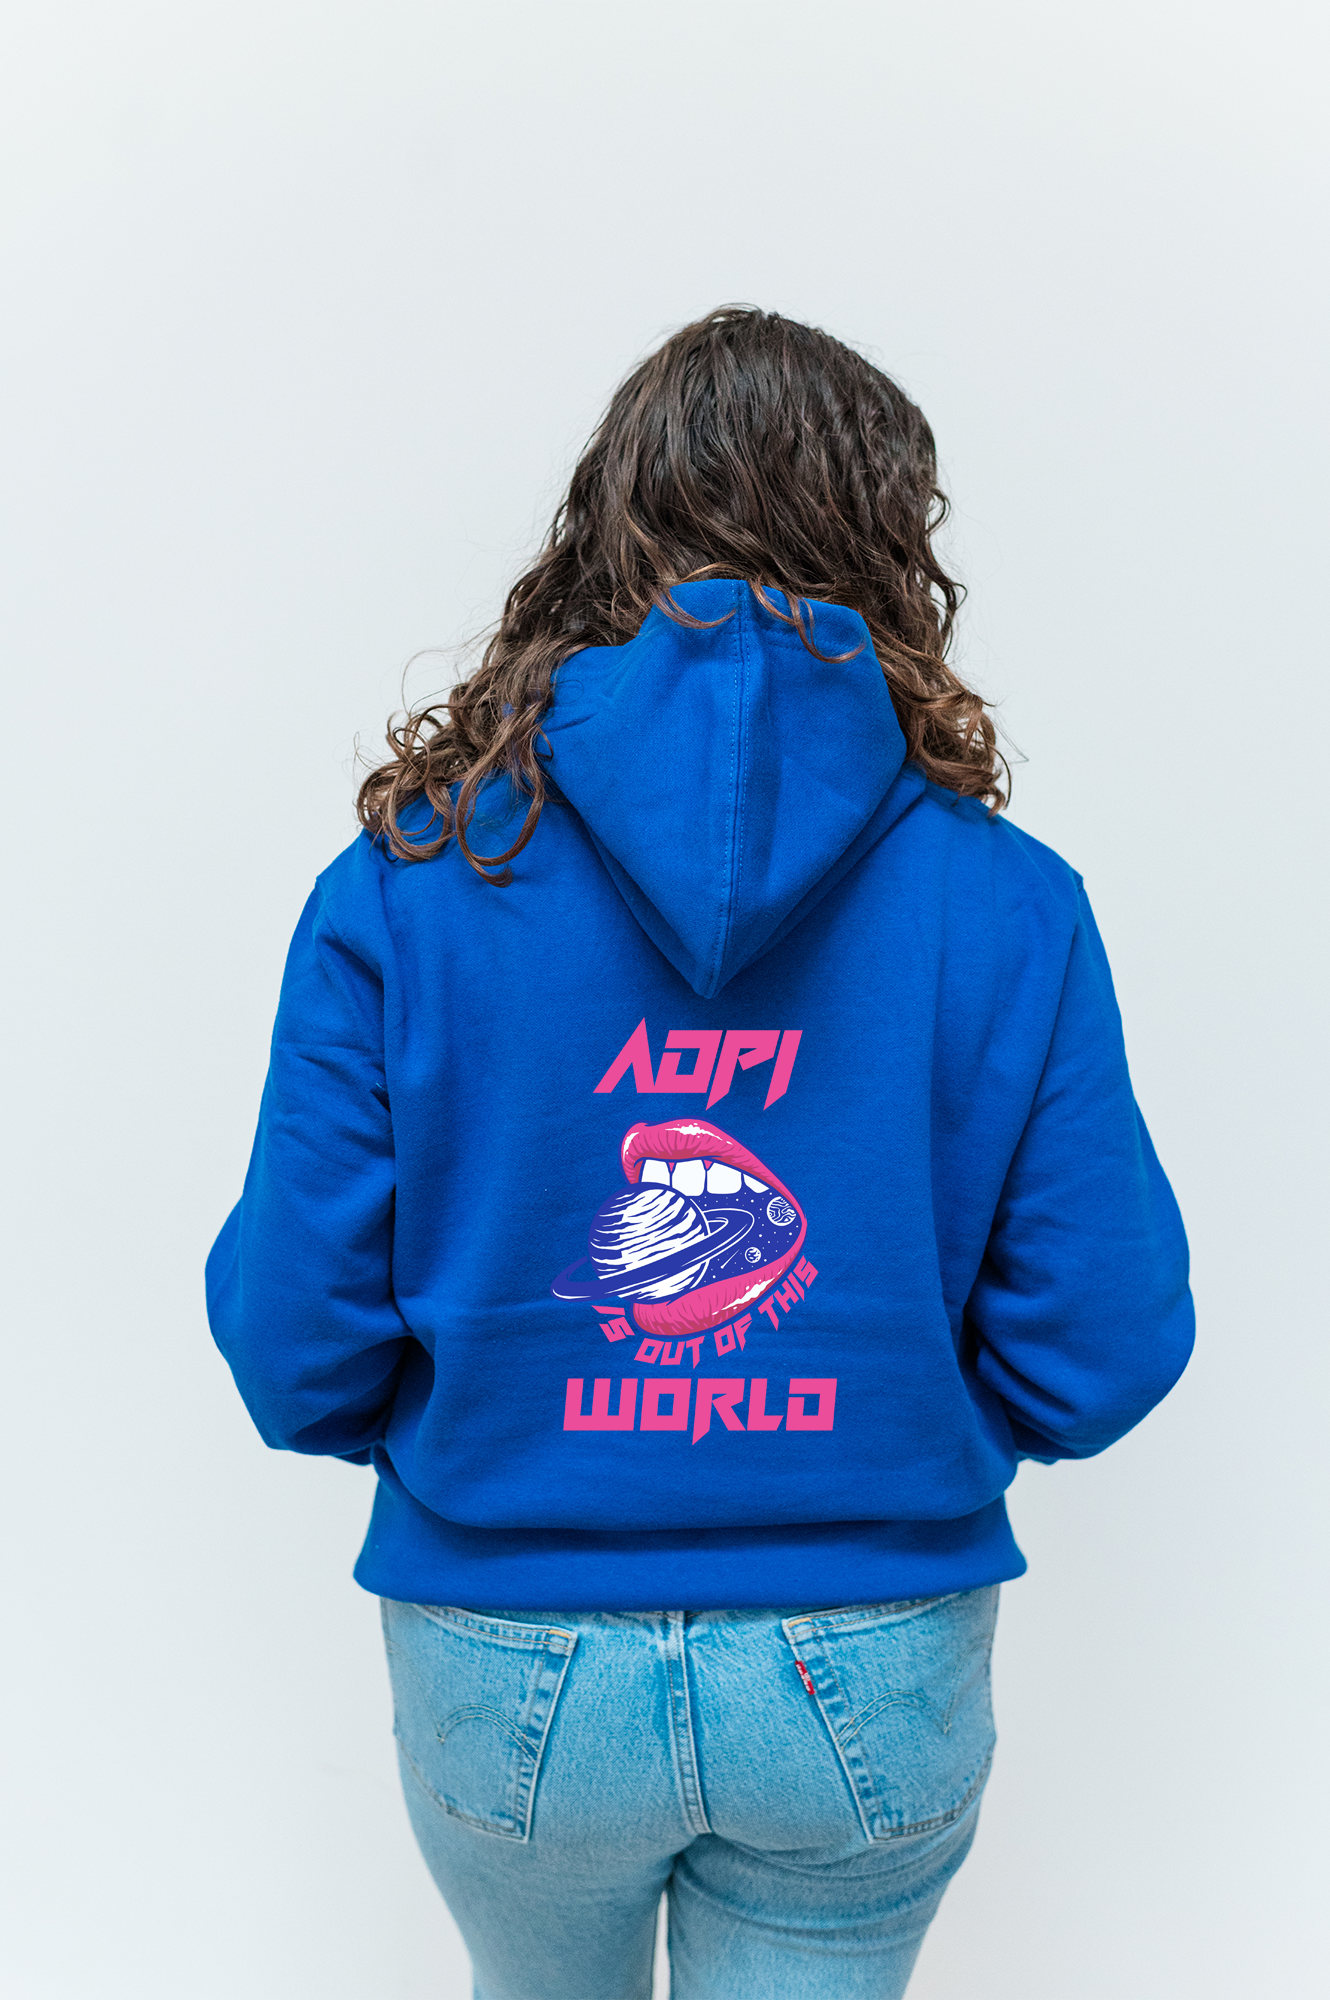 the back of a woman wearing a blue hoodie